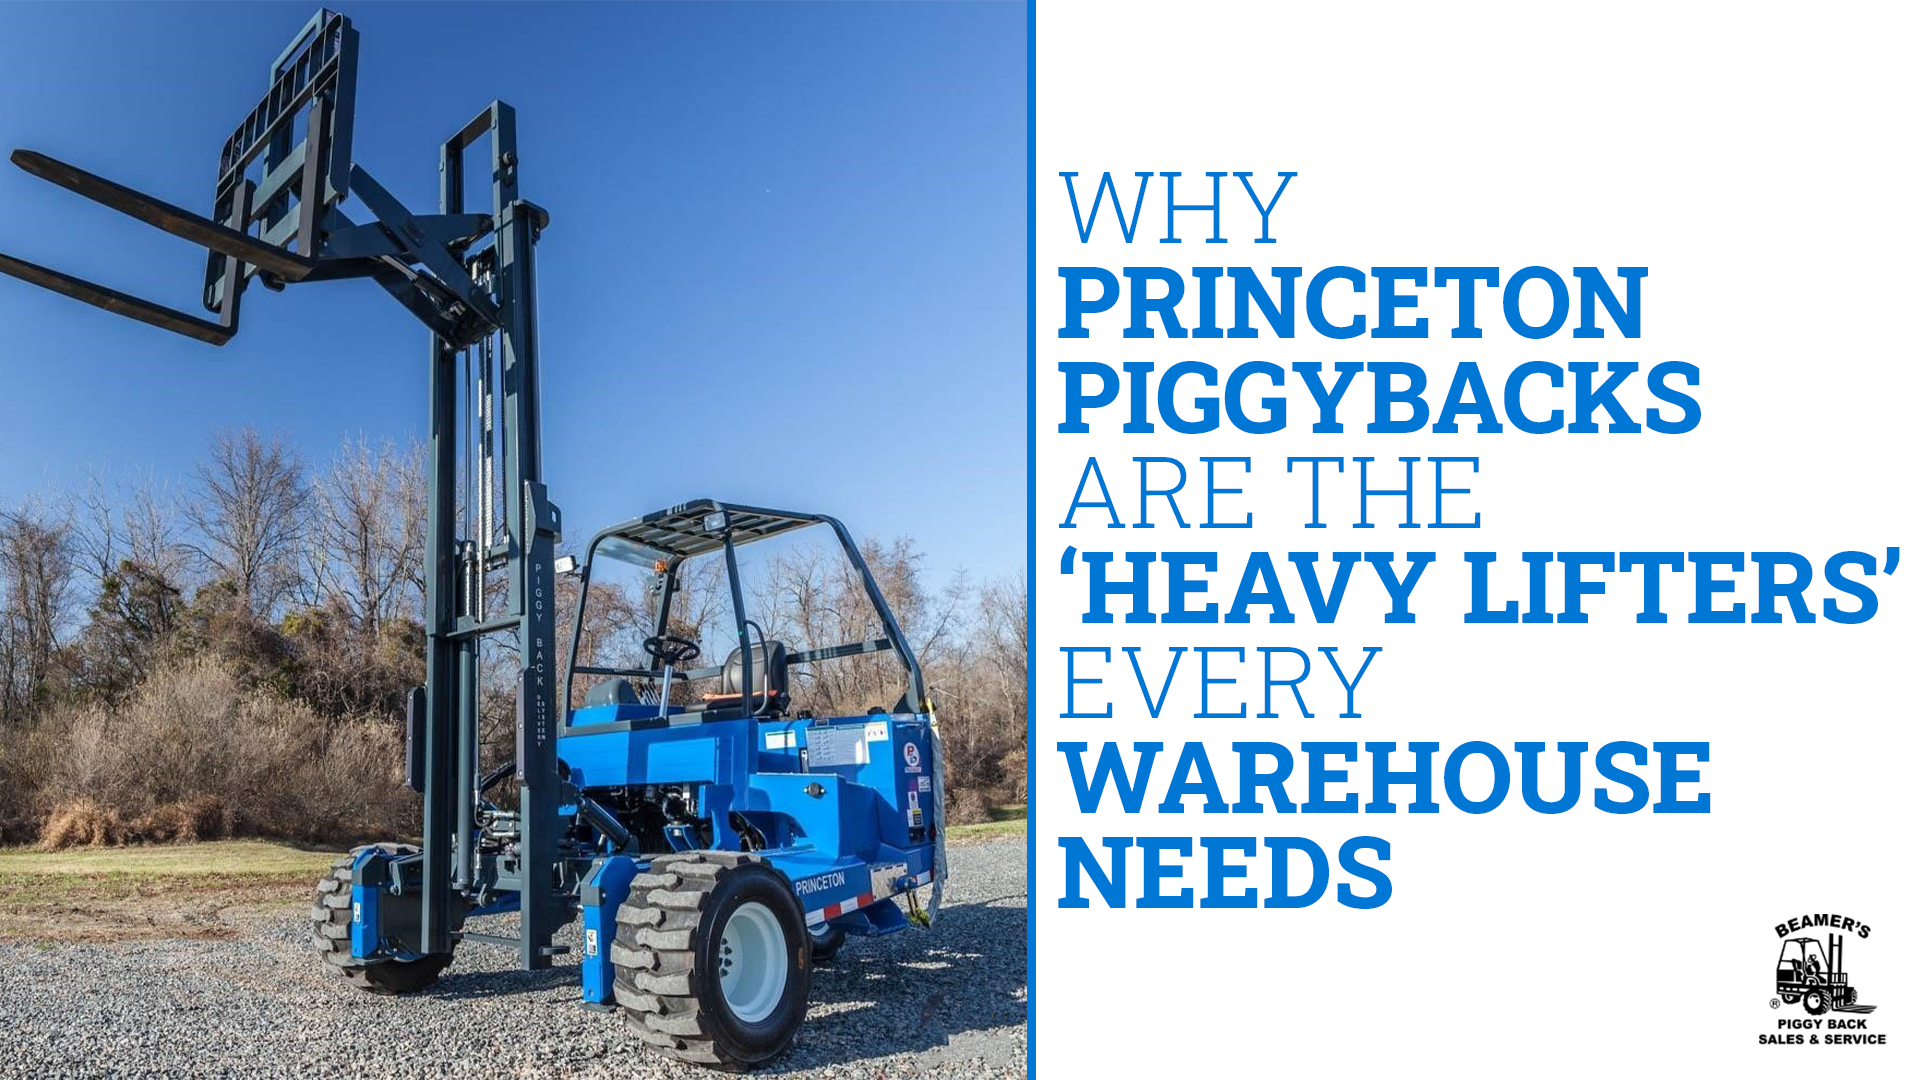 A blue forklift. The text reads, "Why Princeton Piggybacks are the 'Heavy Lifters' Every Warehouse Needs". 